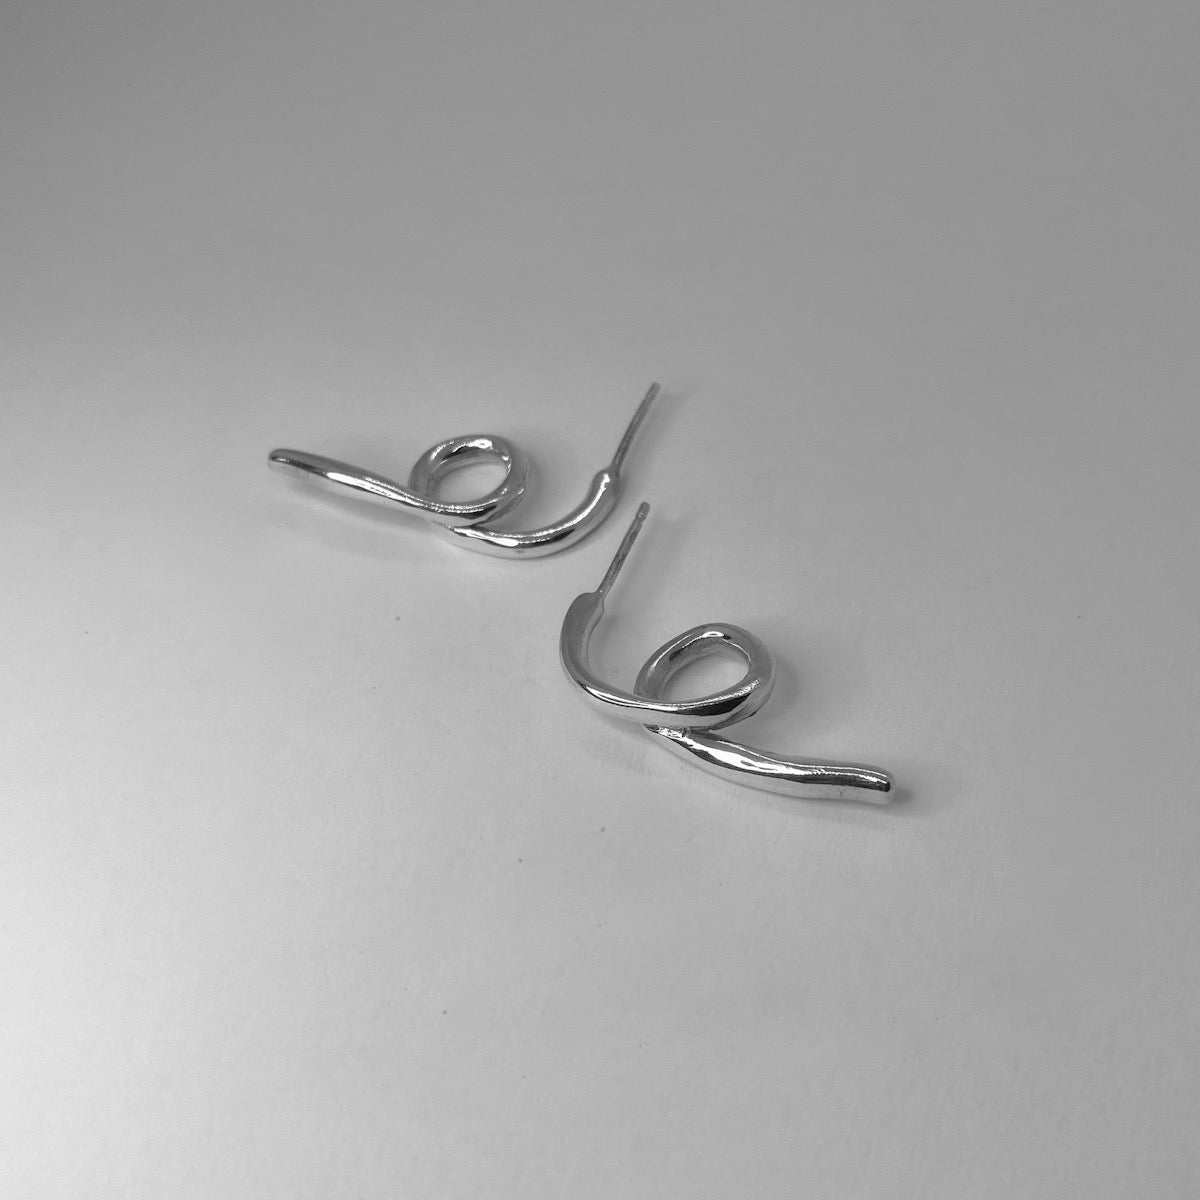 Handmade earrings crafted from sterling silver 925